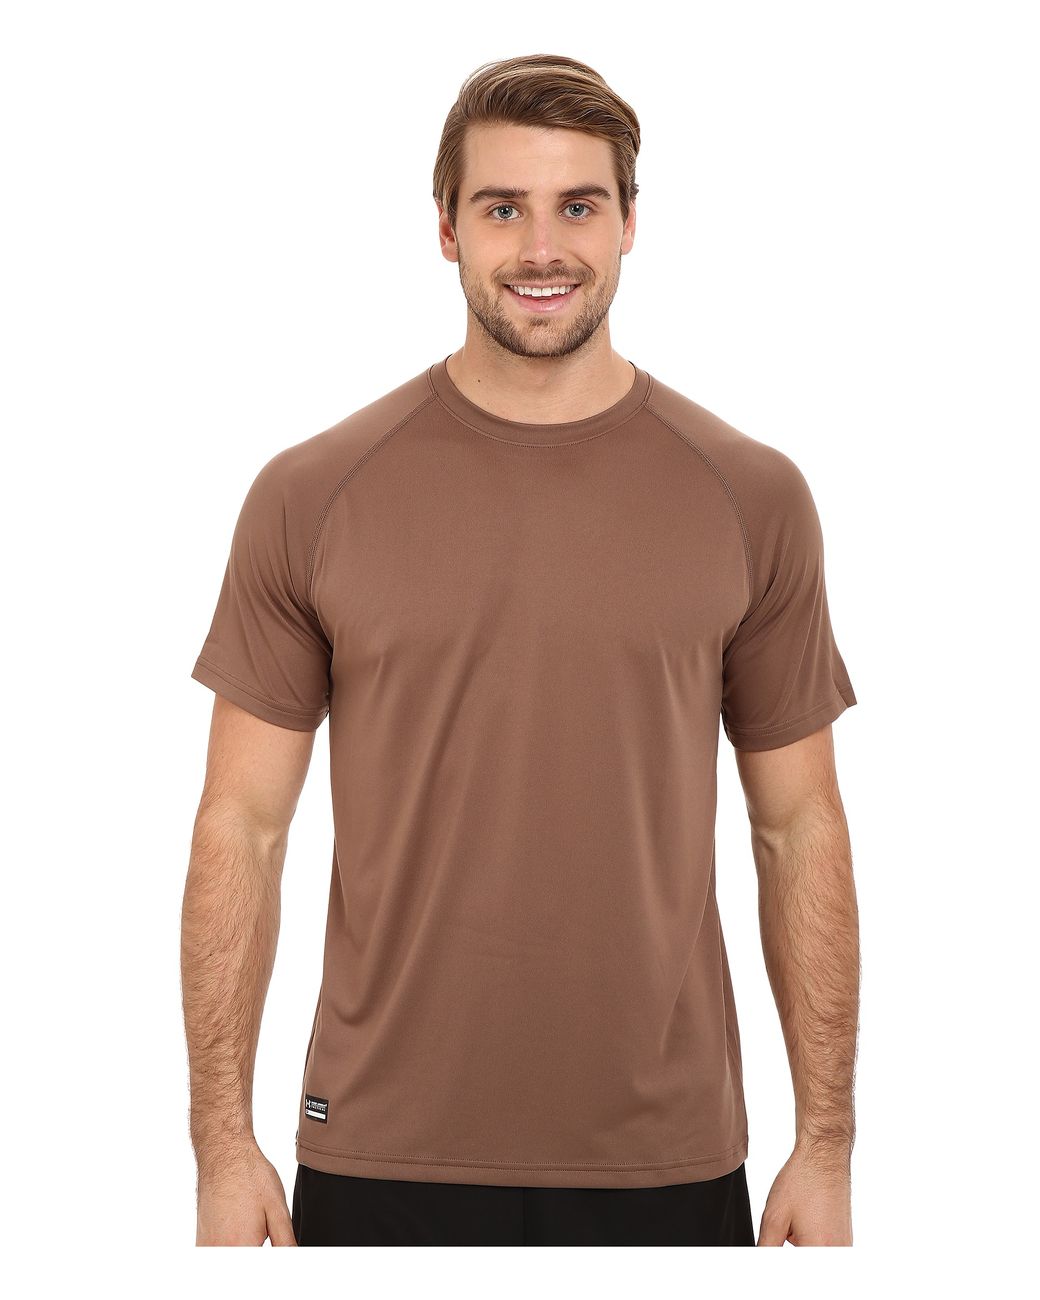 Under Armour Ua Tac Tech Tee in Brown for Men